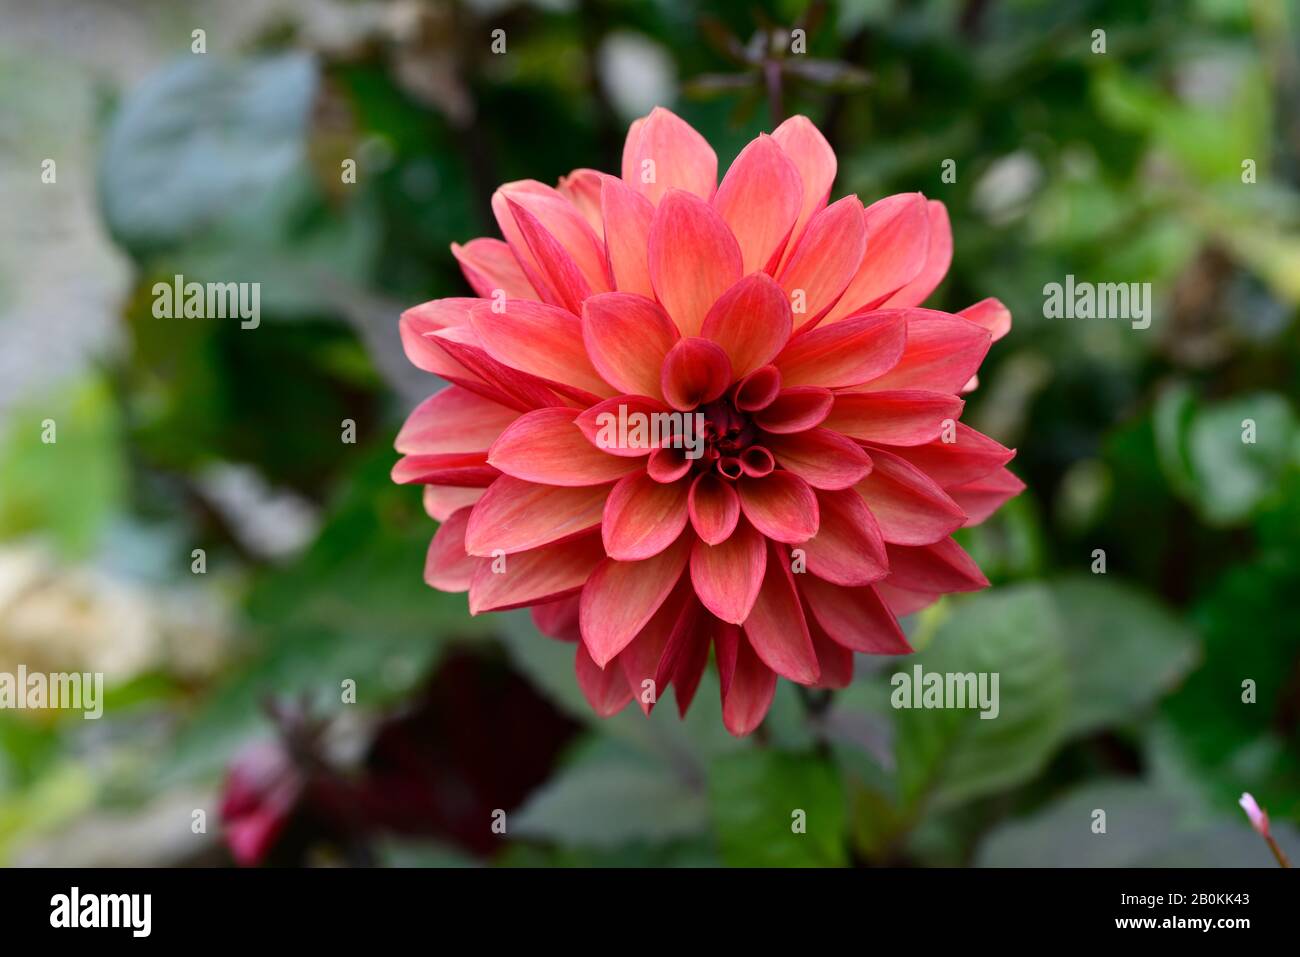 dahlia groovy,rusty pink red flowers with orange undertones,flowers,flower,flowering,dahlia,garden,gardens,RM Floral Stock Photo